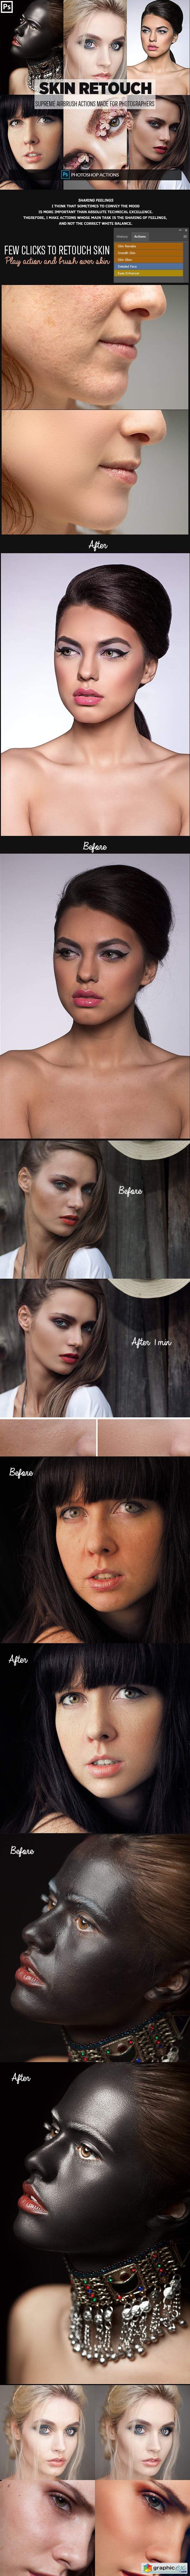 Easy Skin Retouch Photoshop Actions